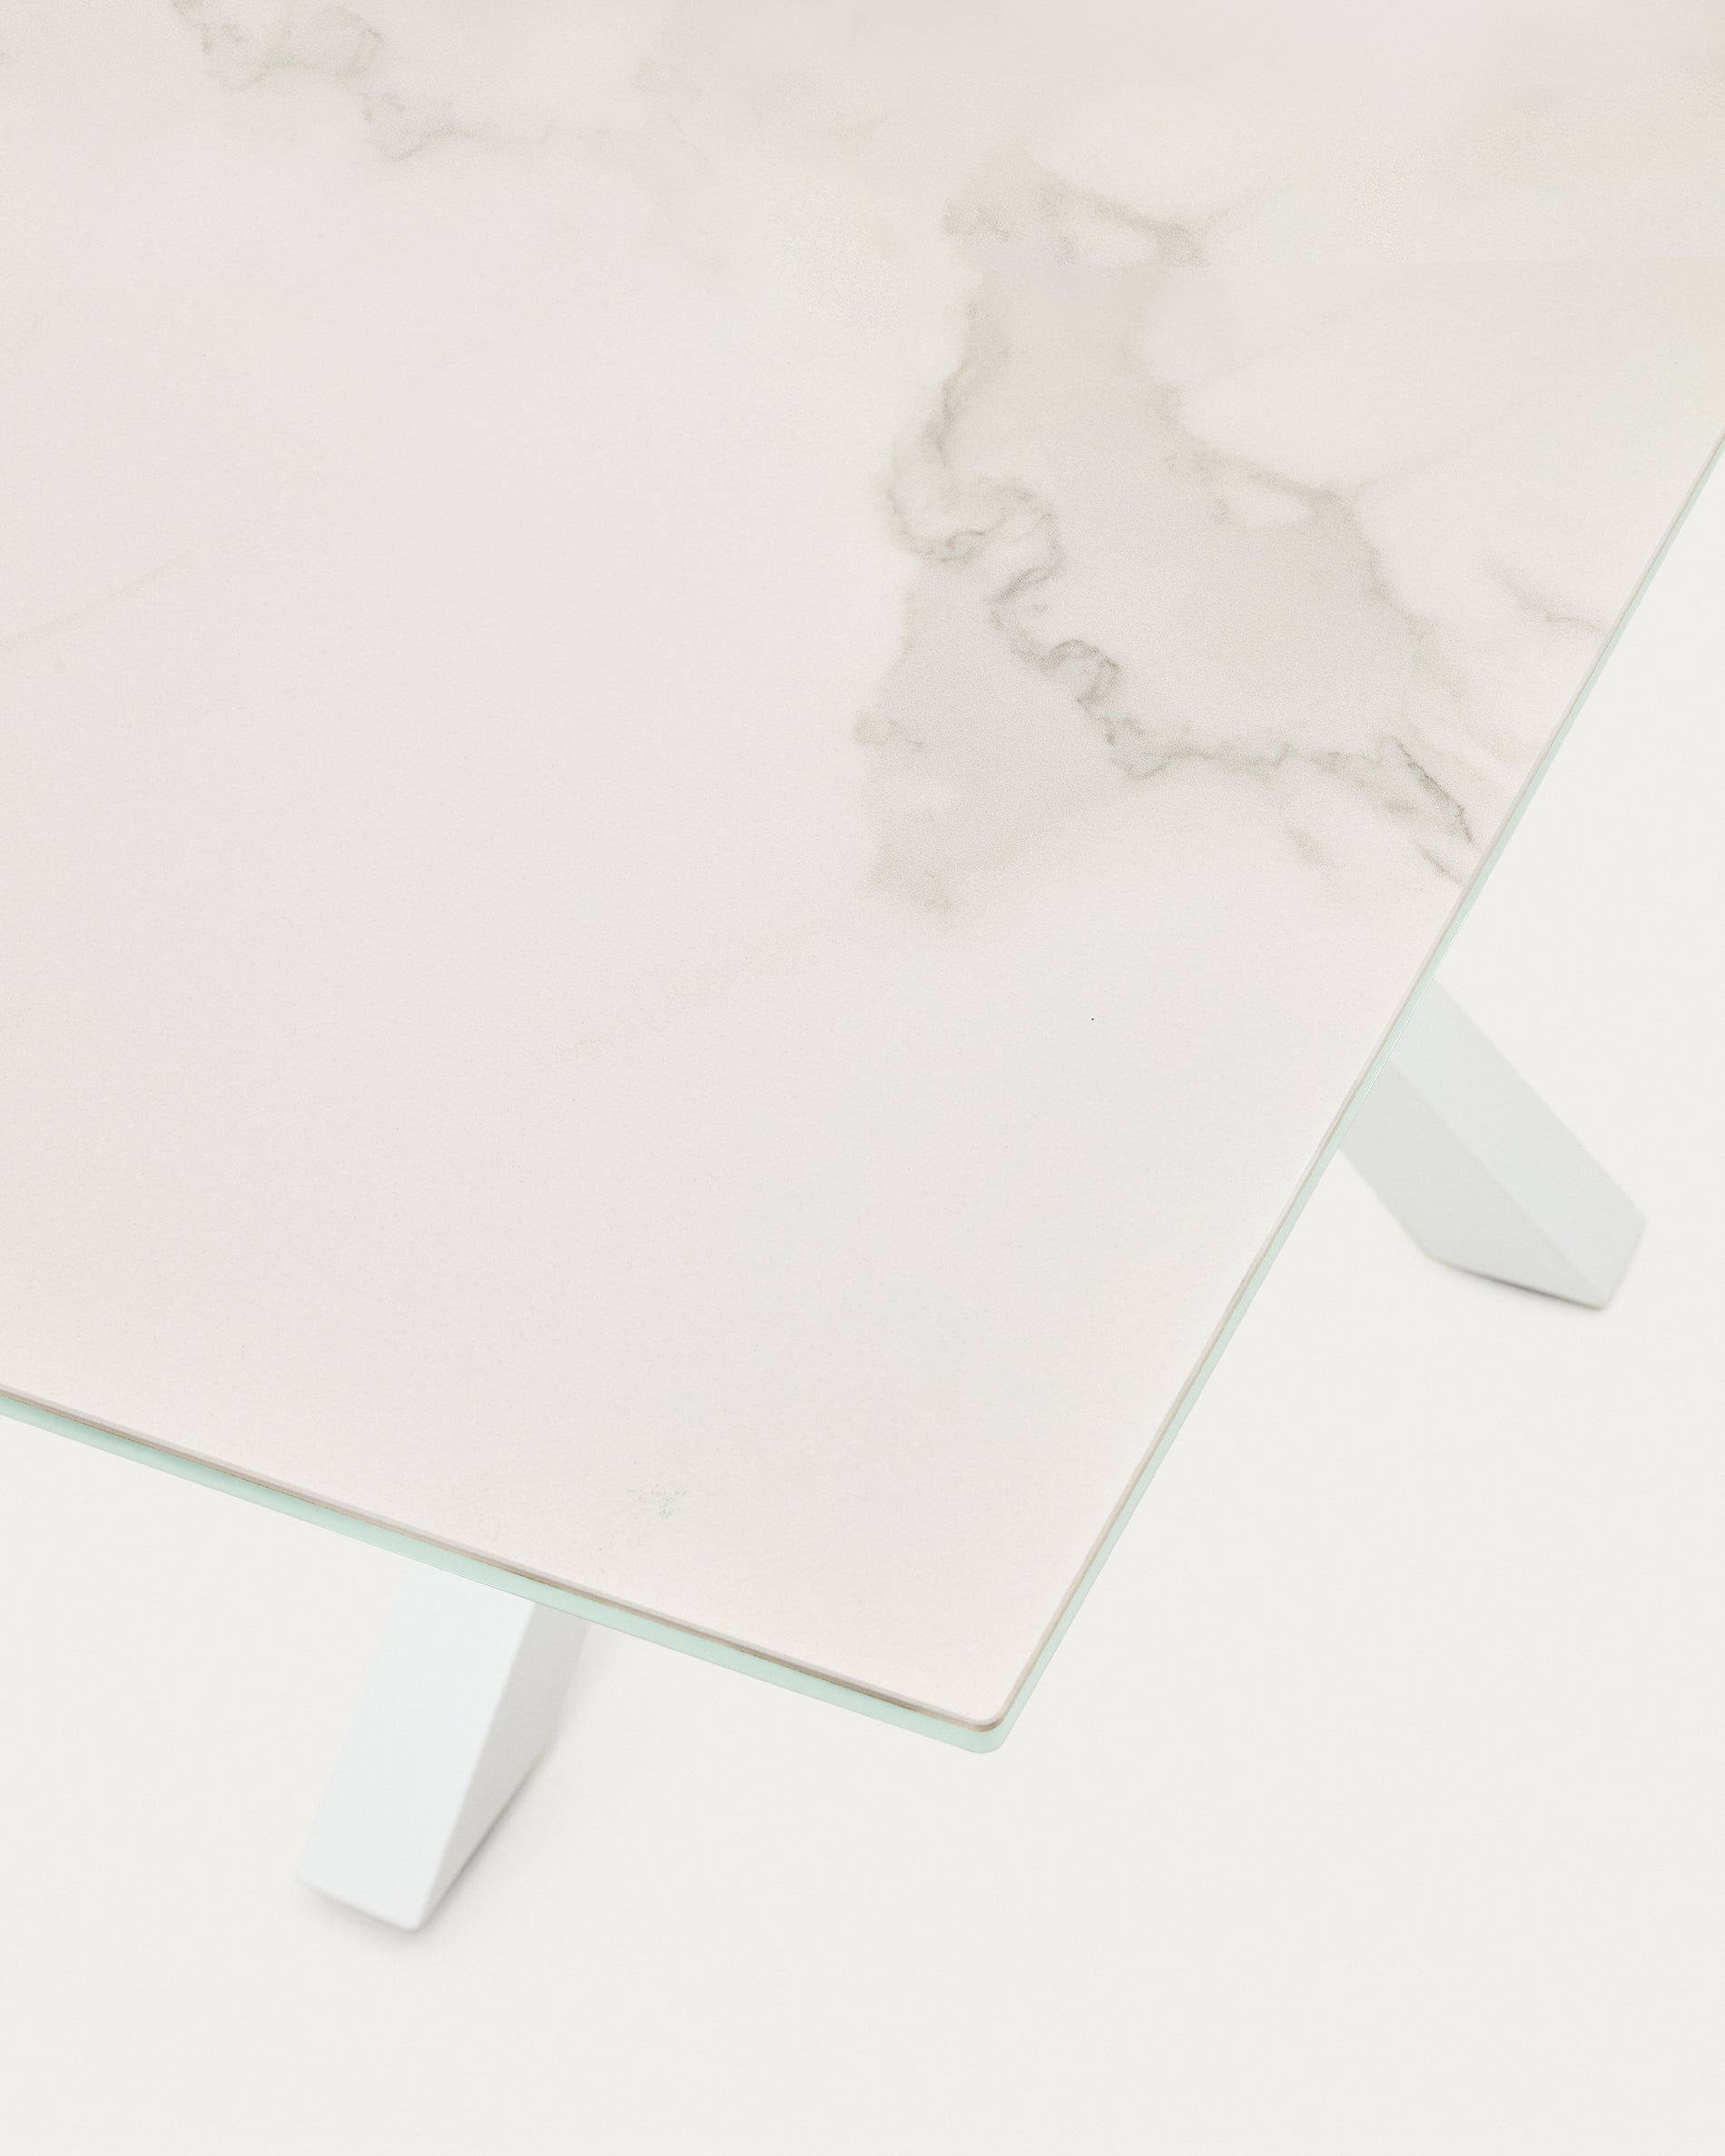 Argo table in white Kalos porcelain and steel legs with white finish, 160 x 90 cm